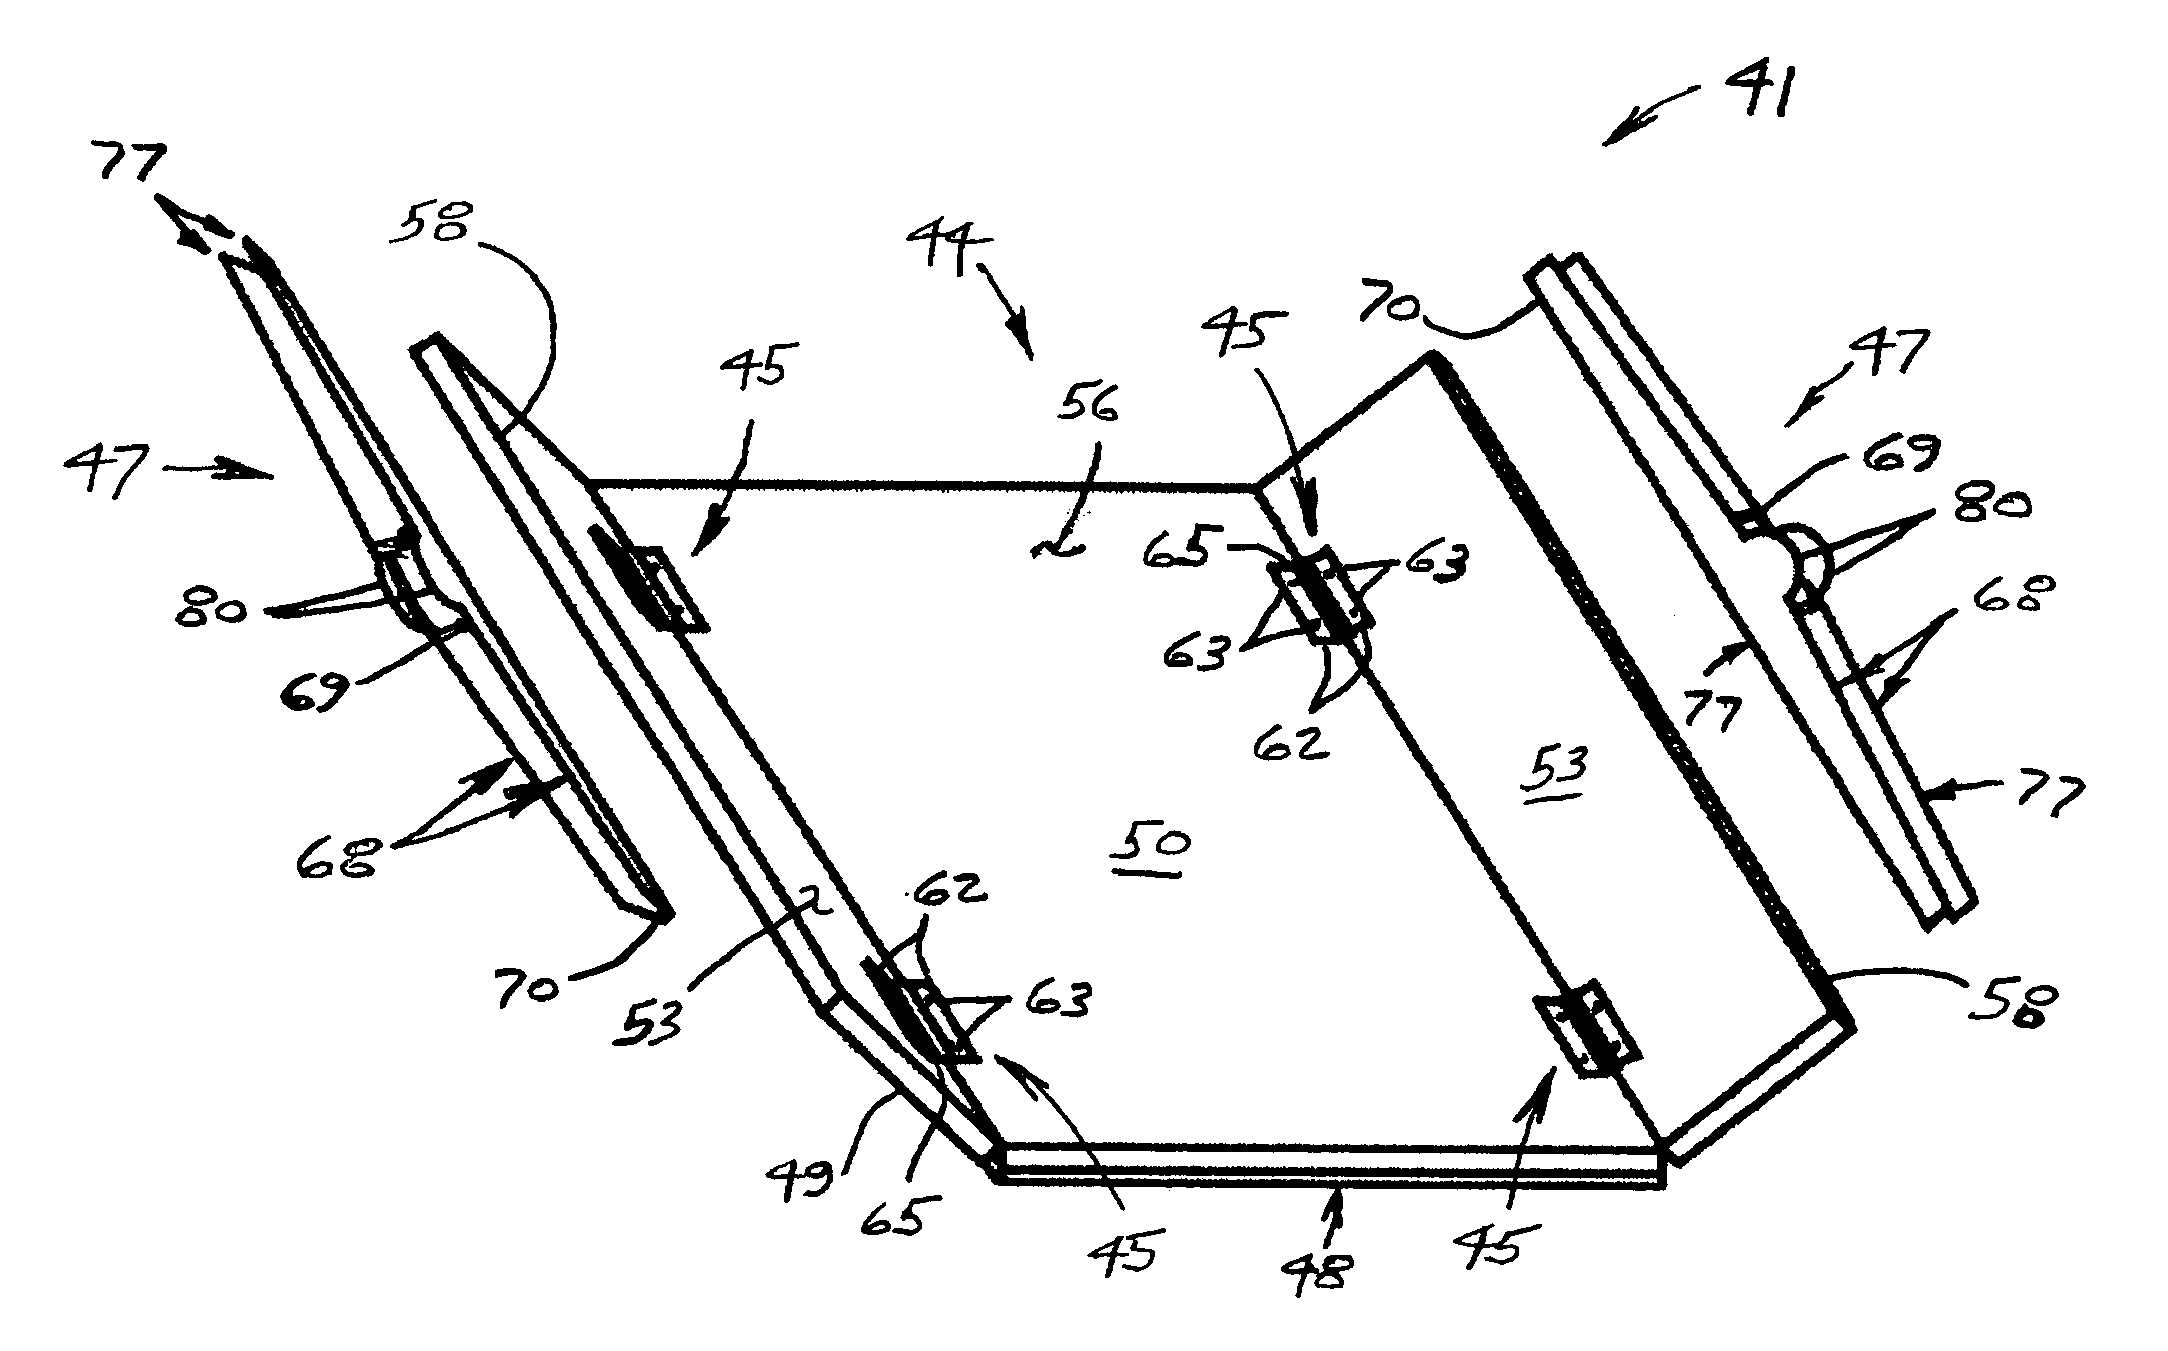 Bed sheet storage device and method of use